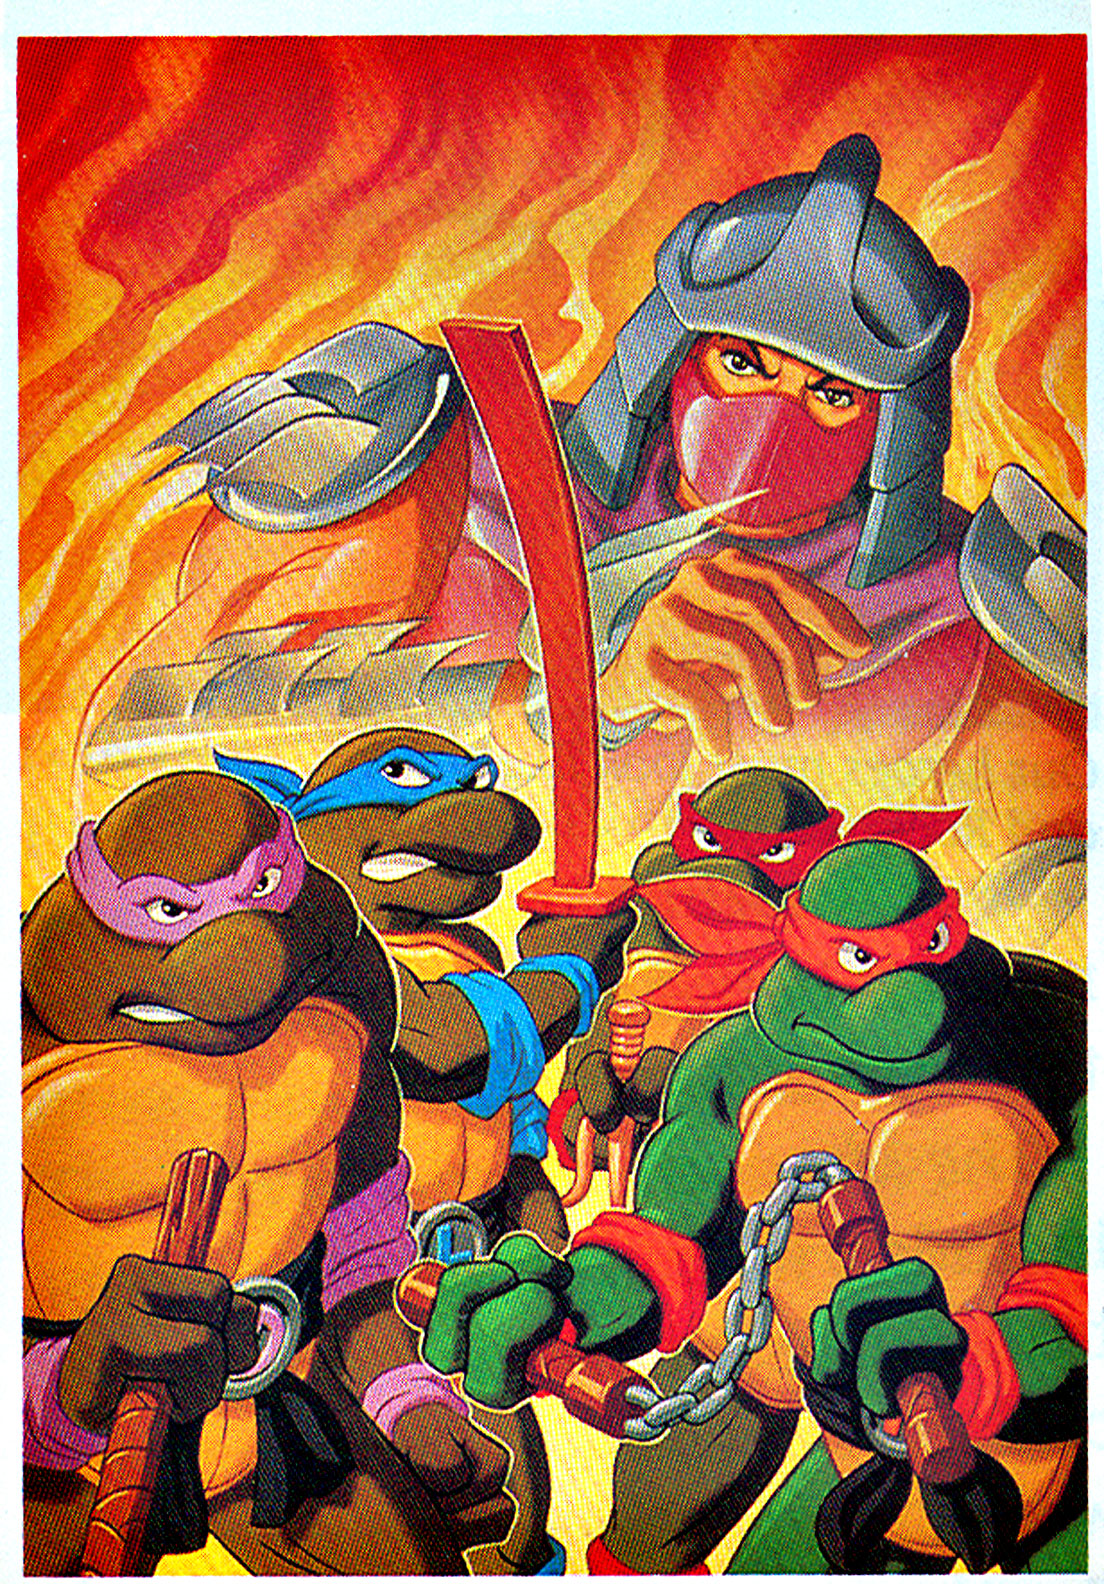 https://static.wikia.nocookie.net/tmnt/images/6/6f/1TMNT-TOS_VHS-HEROES-in-Halfshell_isolated.jpg/revision/latest?cb=20090124105237